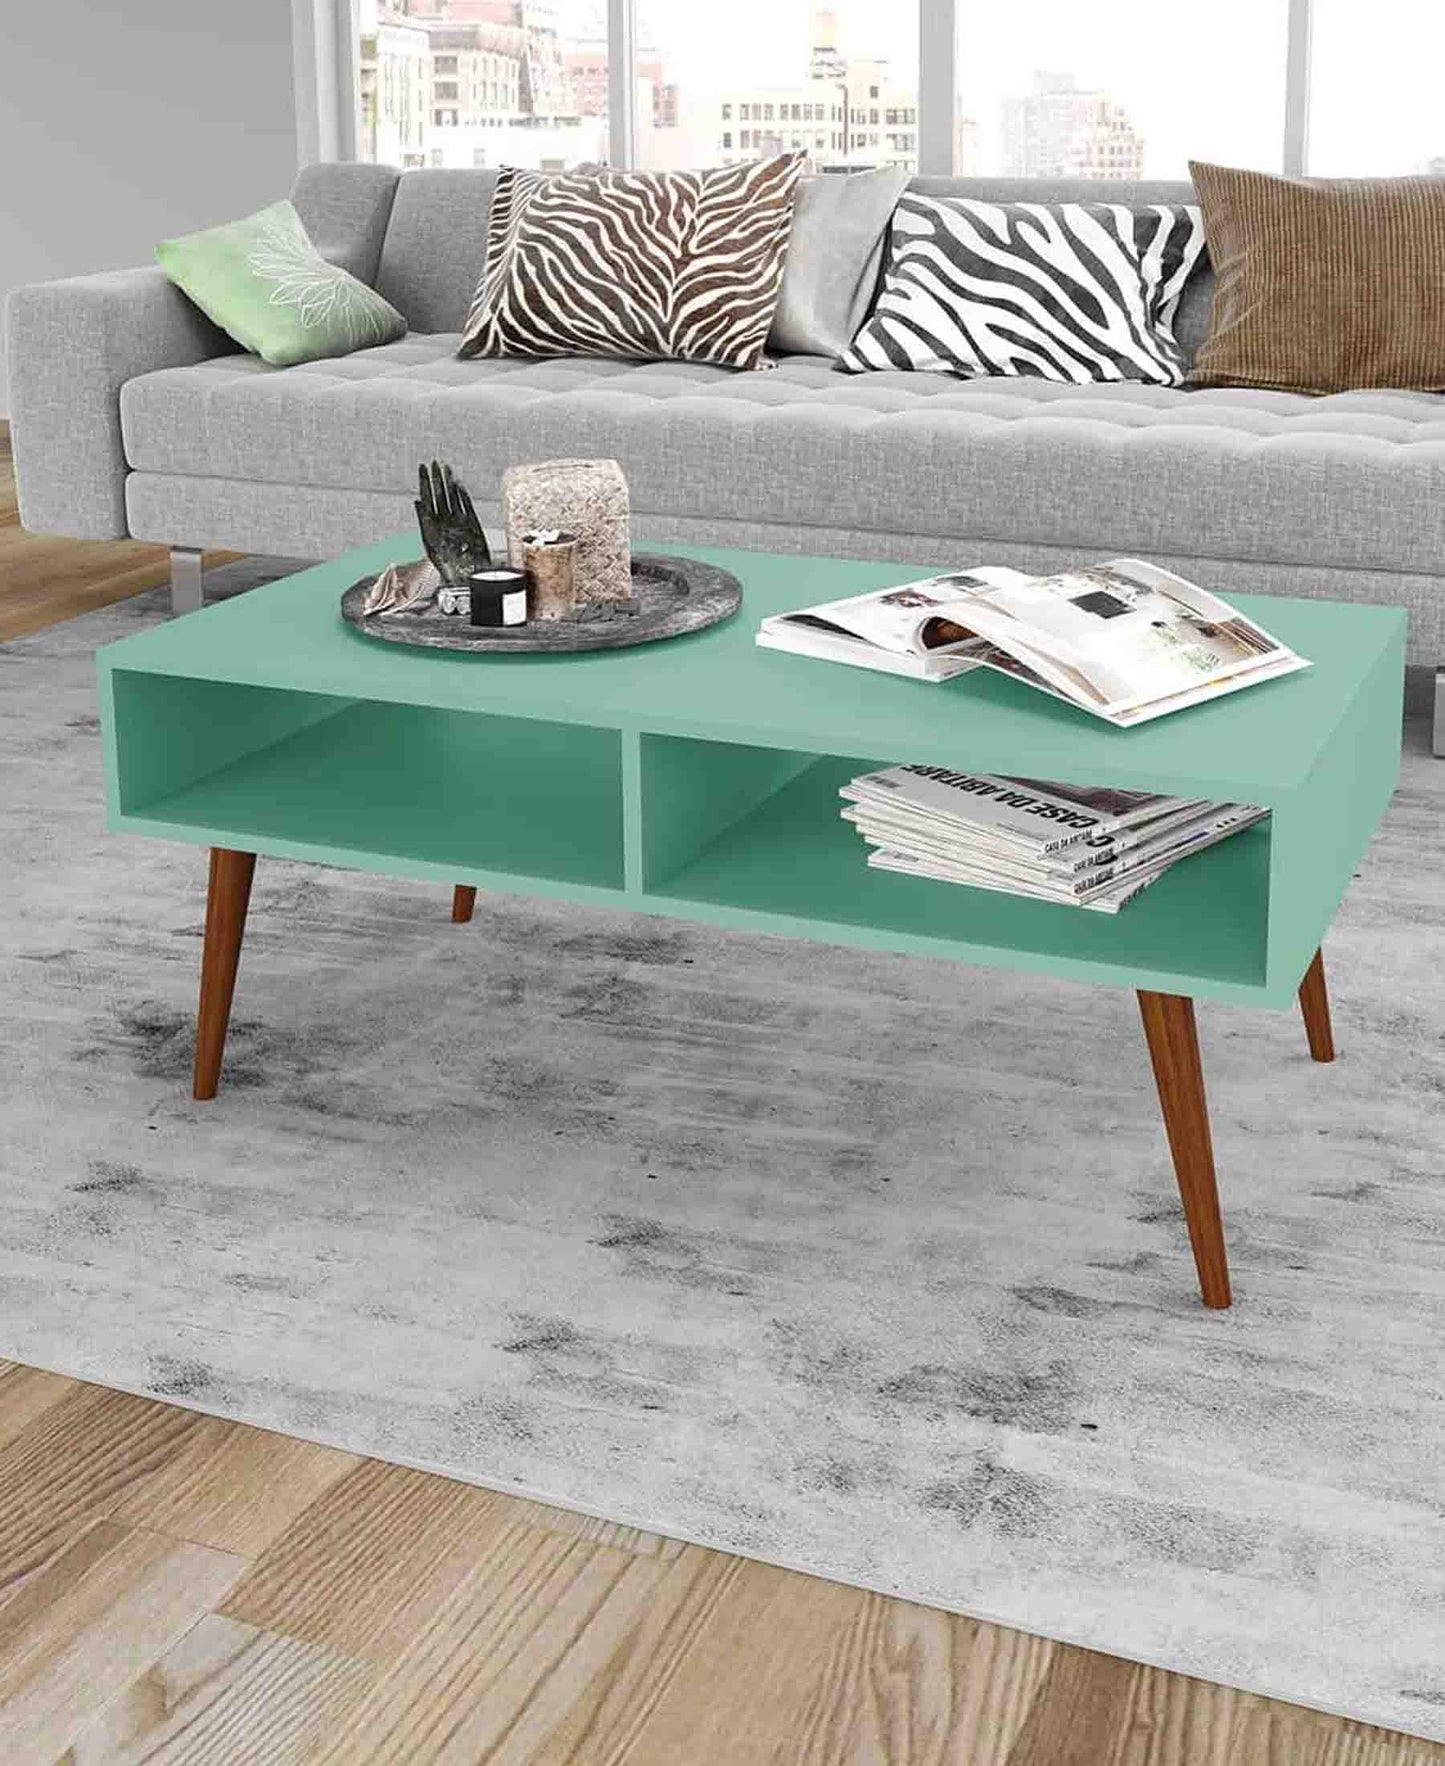 Modern Brazillian Table – Available In 3 Colours